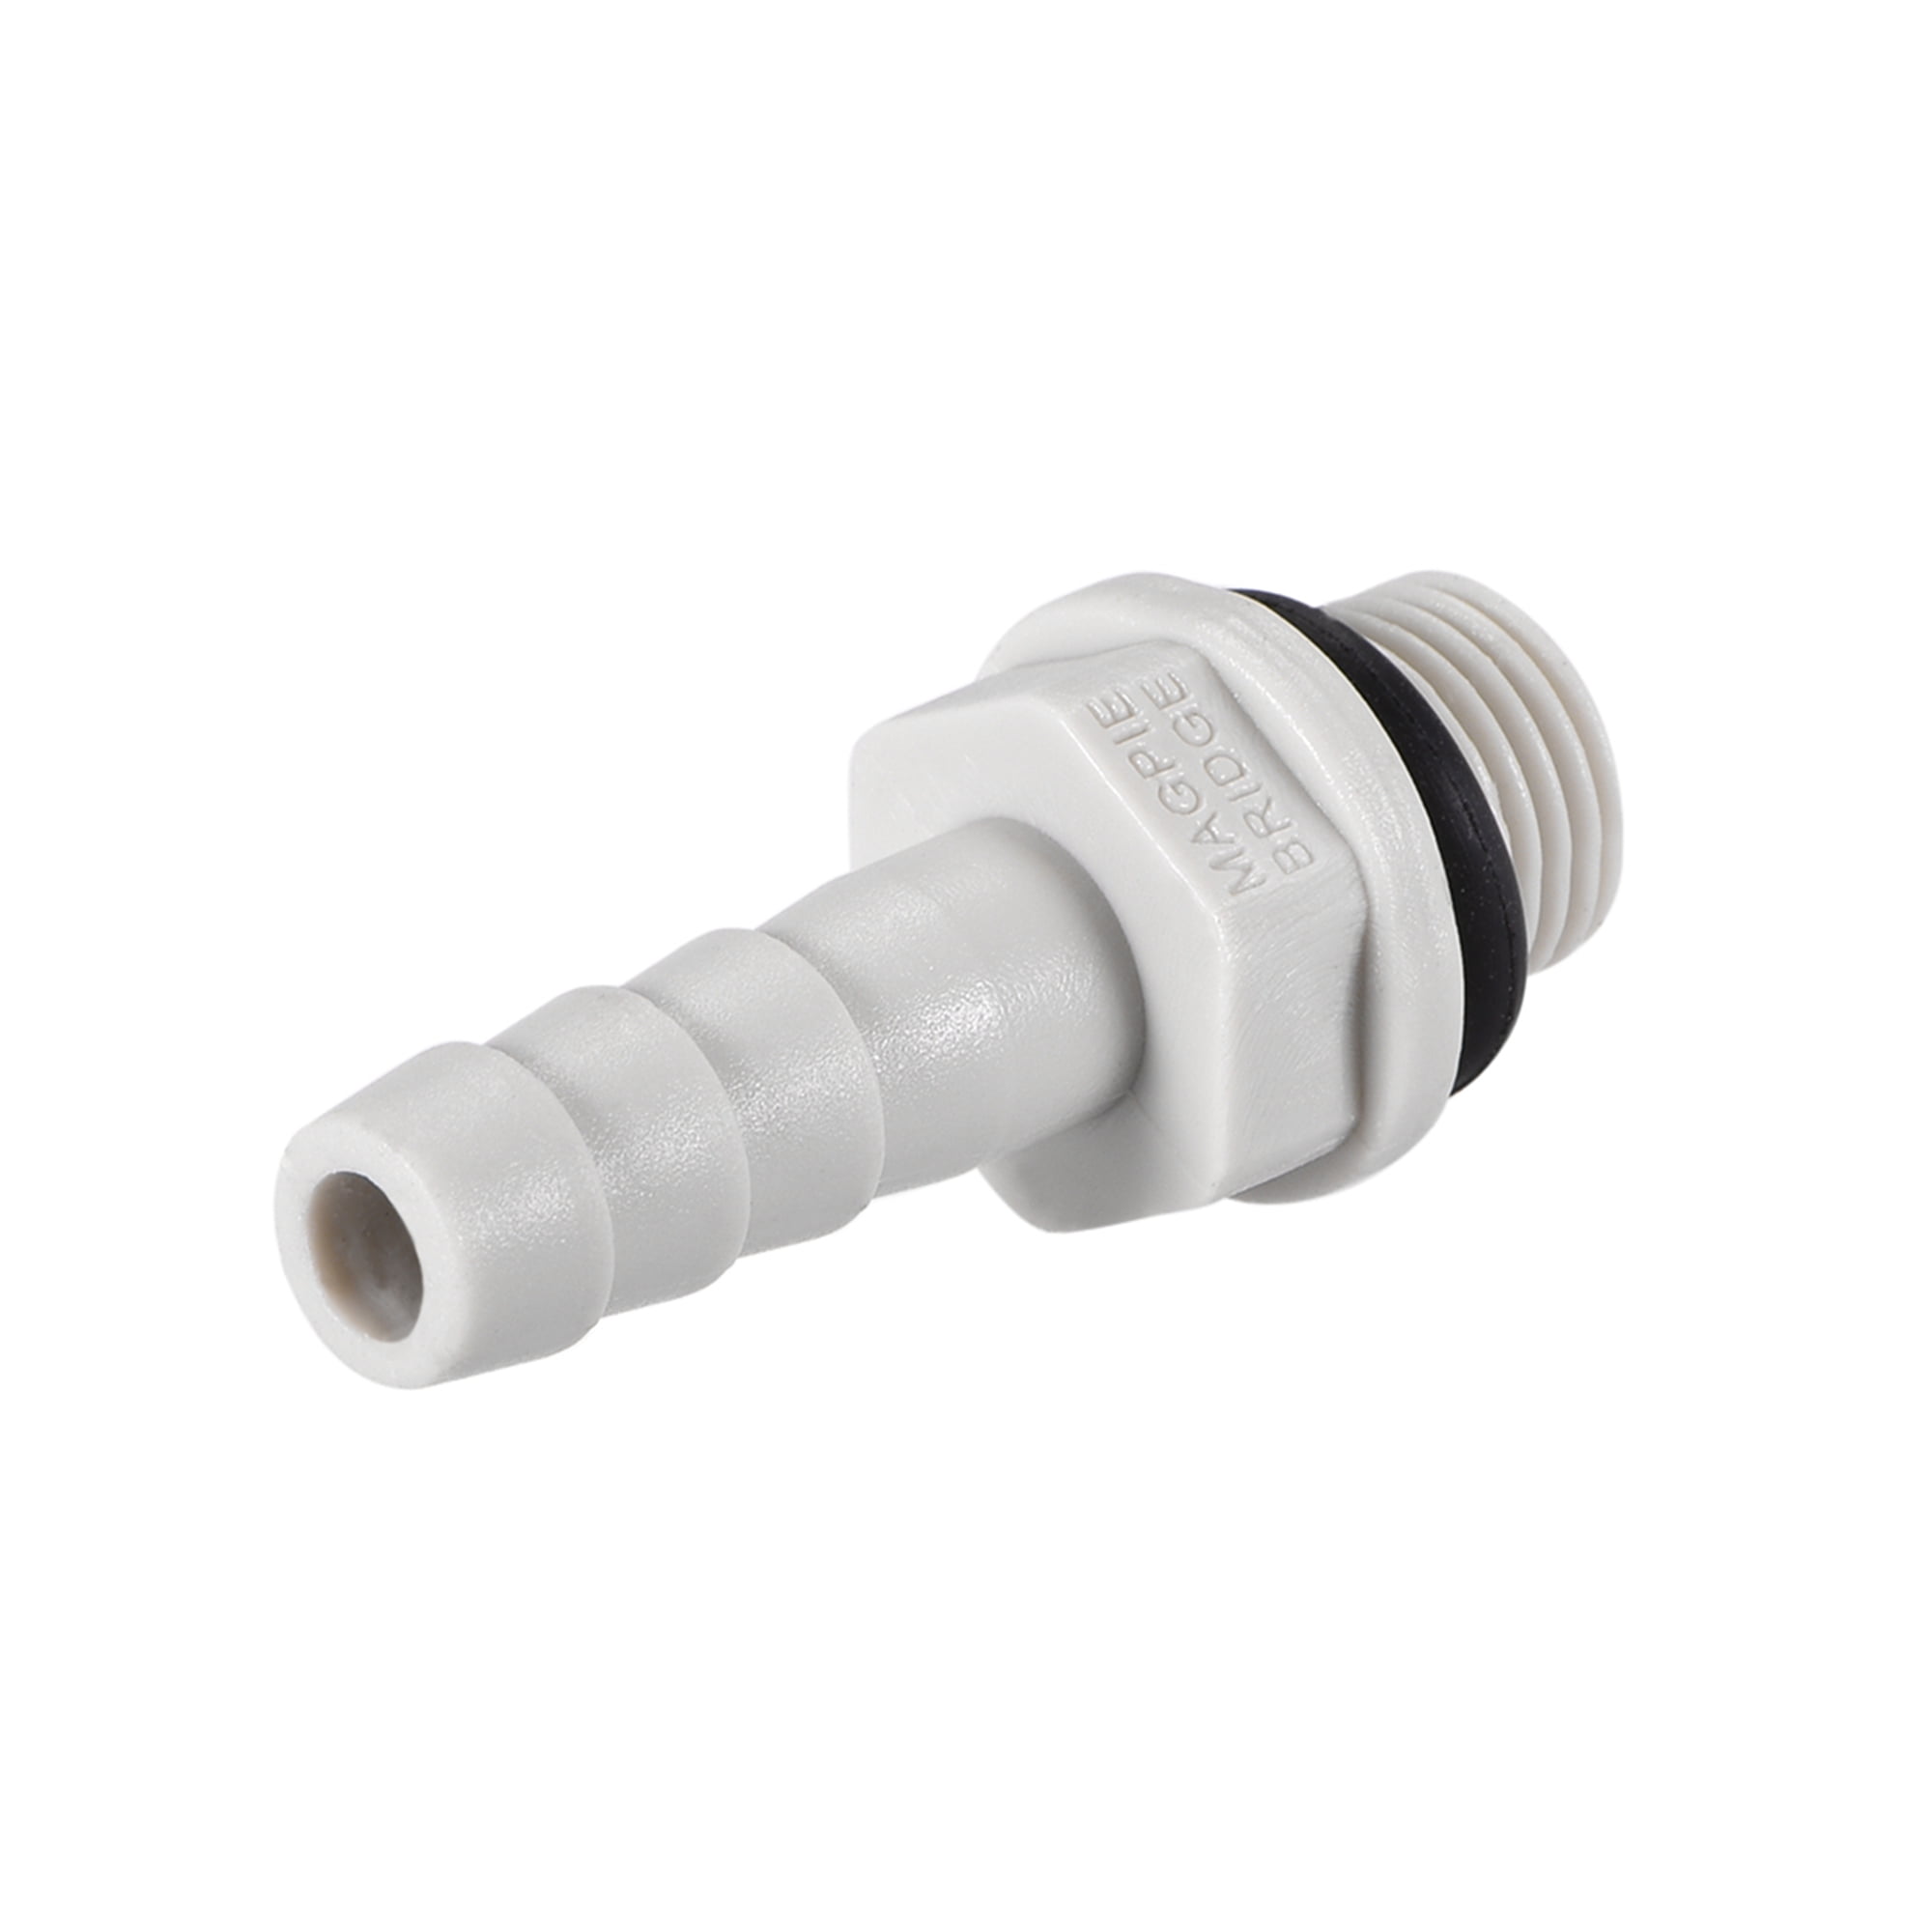 PVC Barb Hose Fittings Connector Adapter 12mm or 15/32 Barbed x 3/4 G  Male Pipe 6pcs 